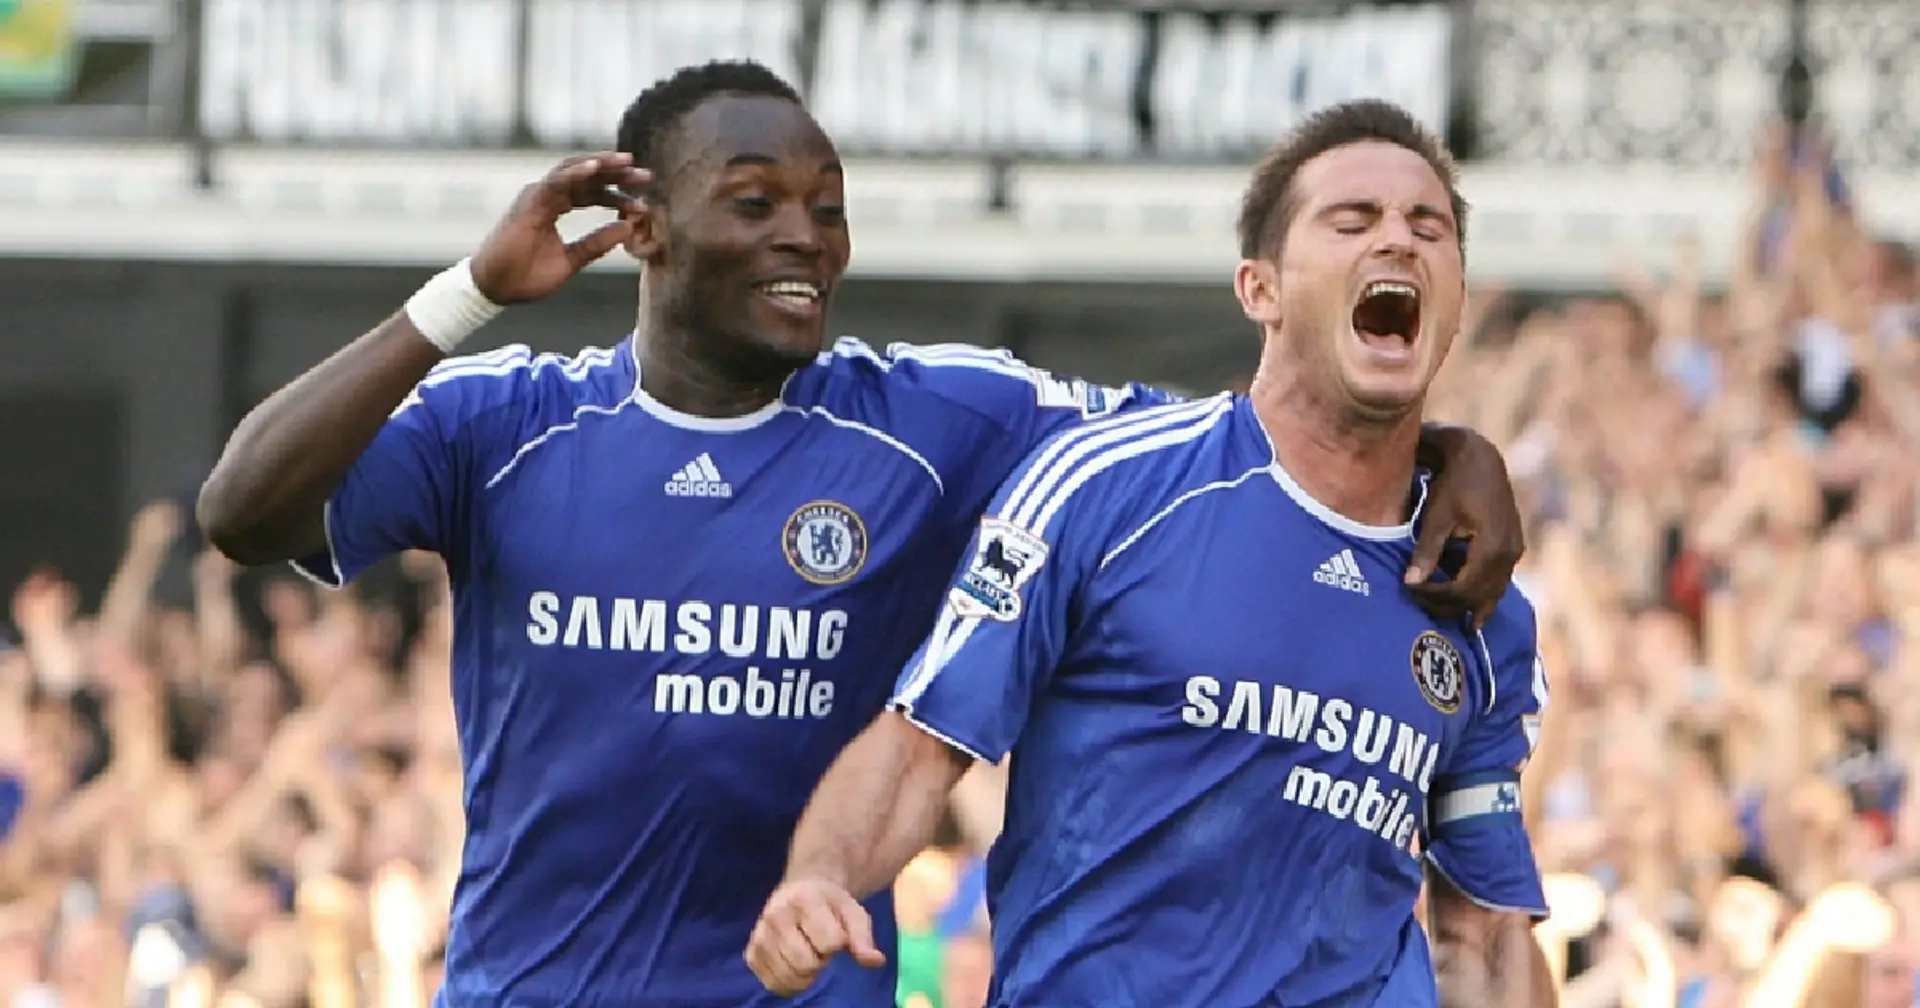 'I didn't see him becoming a manager': Essien expressed his surprise at Lampard's coaching role but praised his ex-teammate's performance